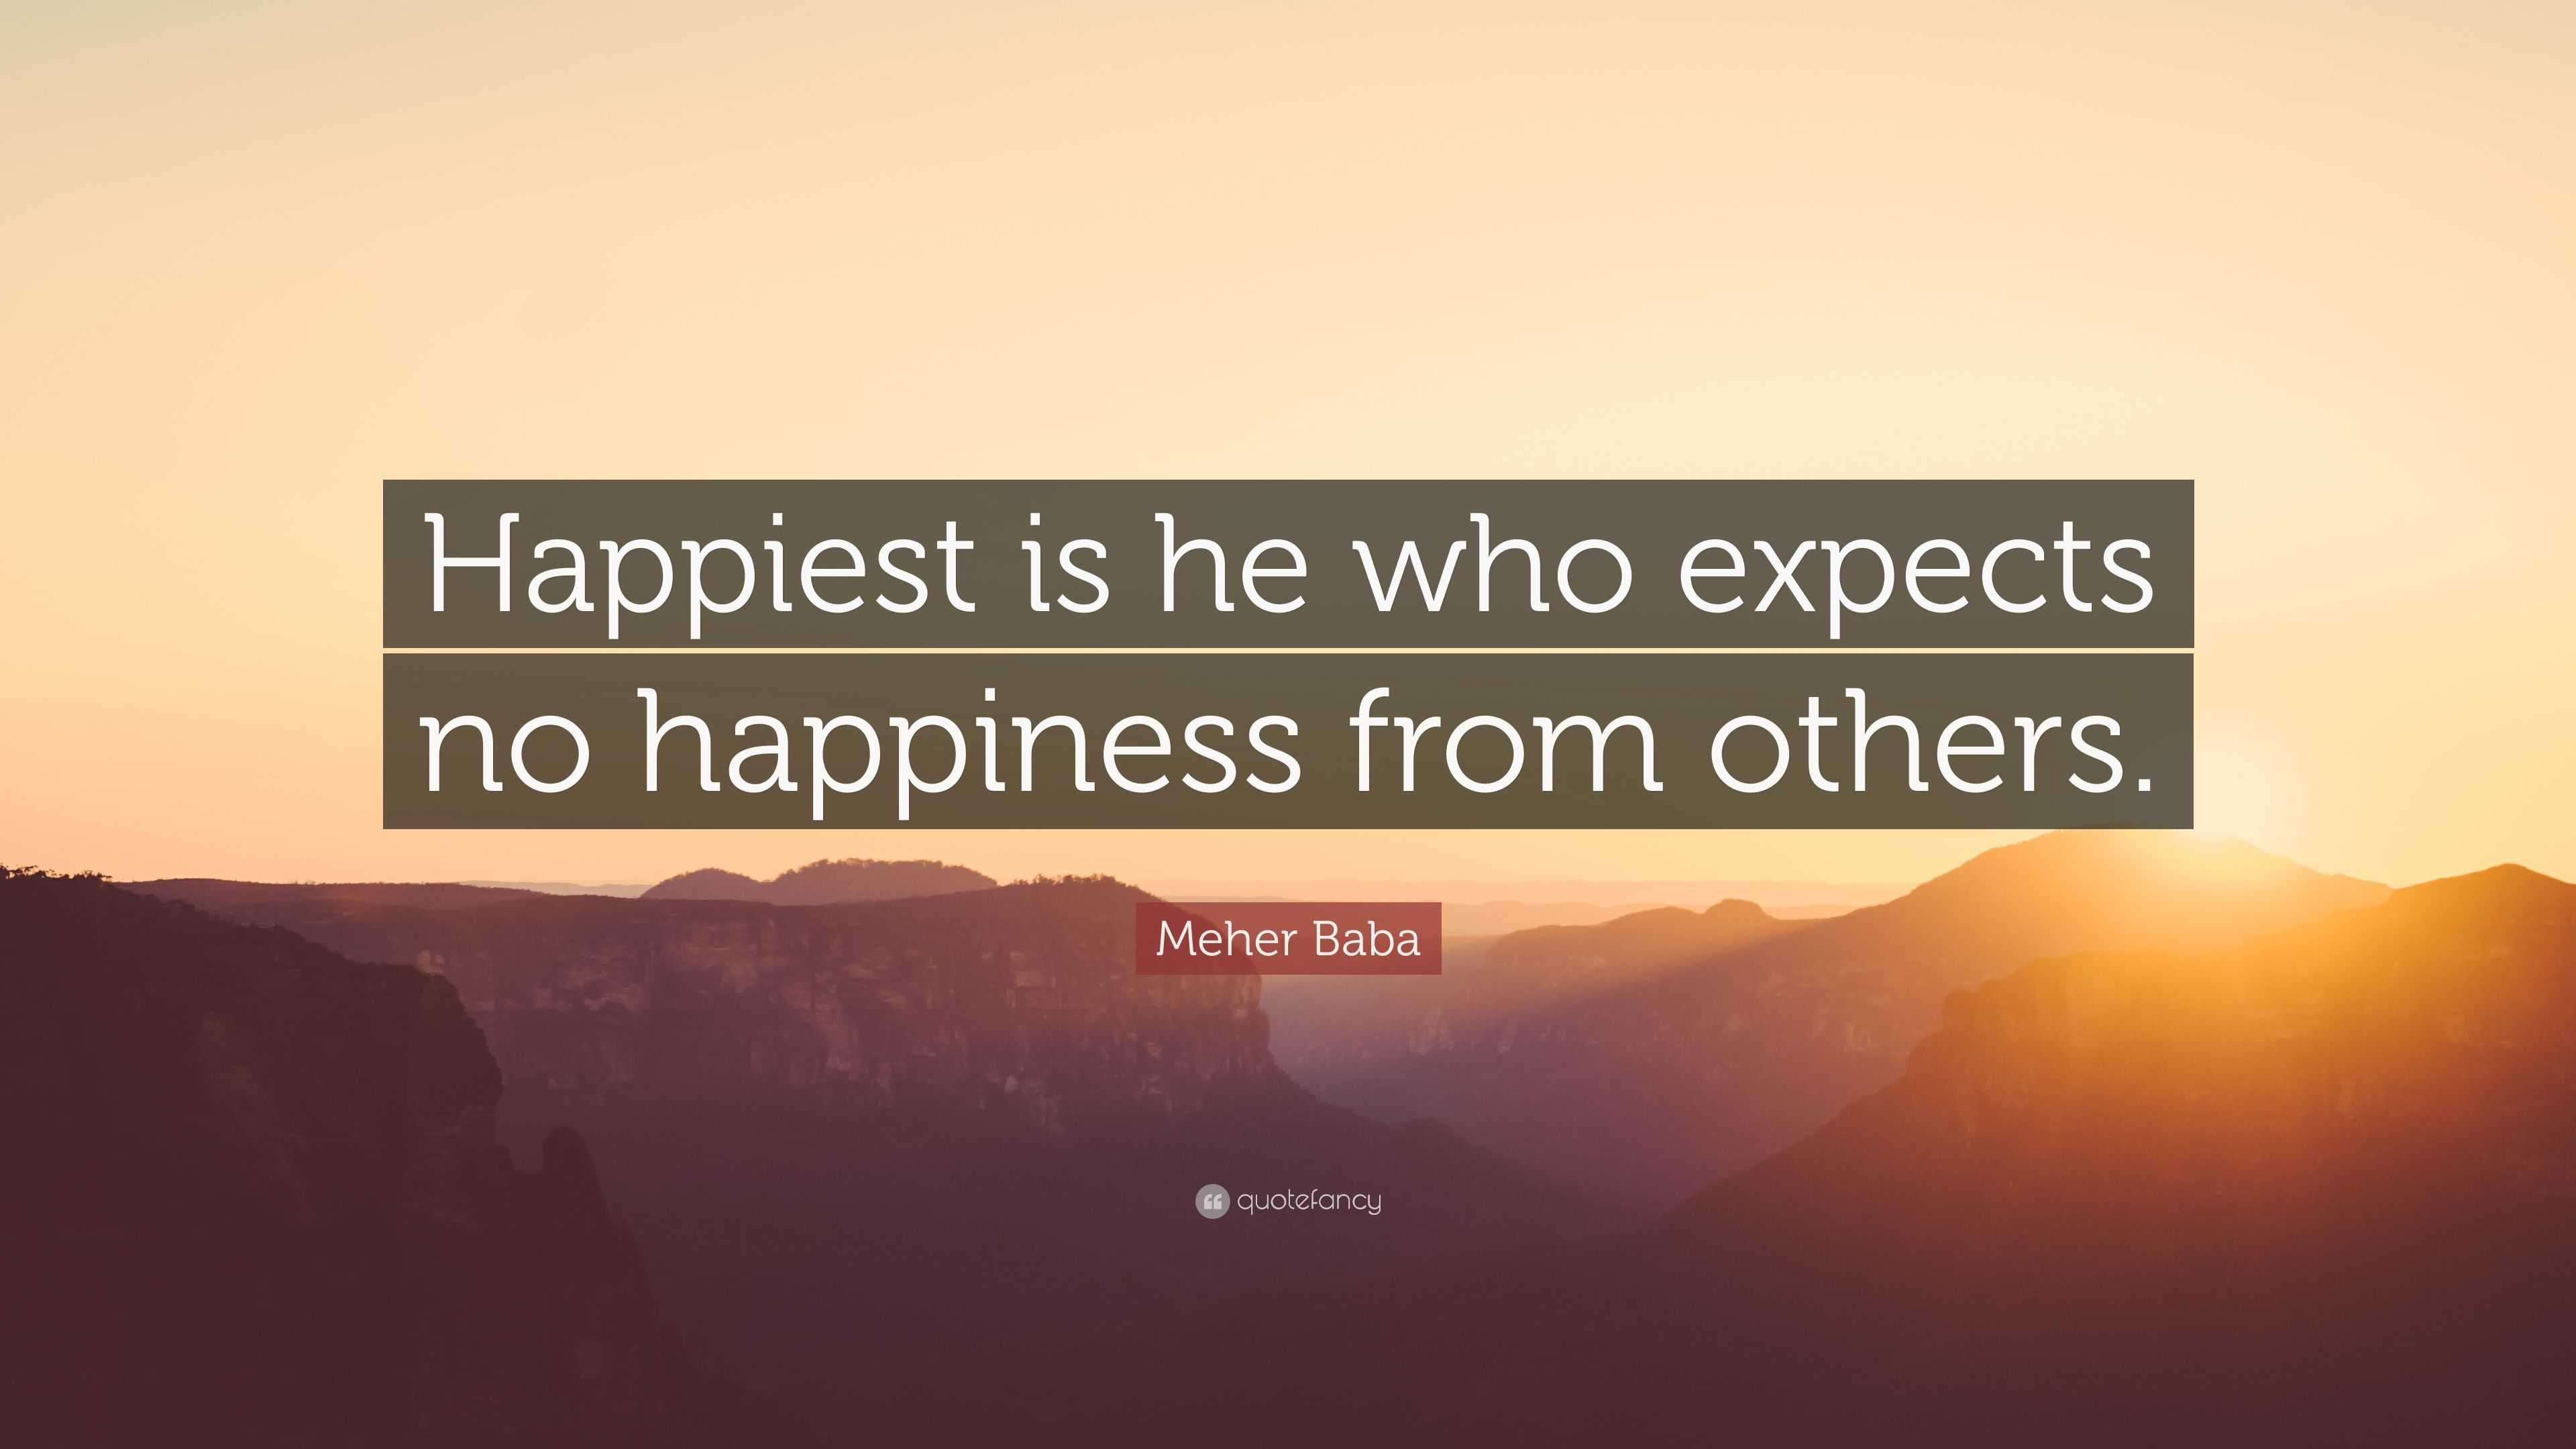 Meher Baba Quote: “Happiest is he who expects no happiness from others.”